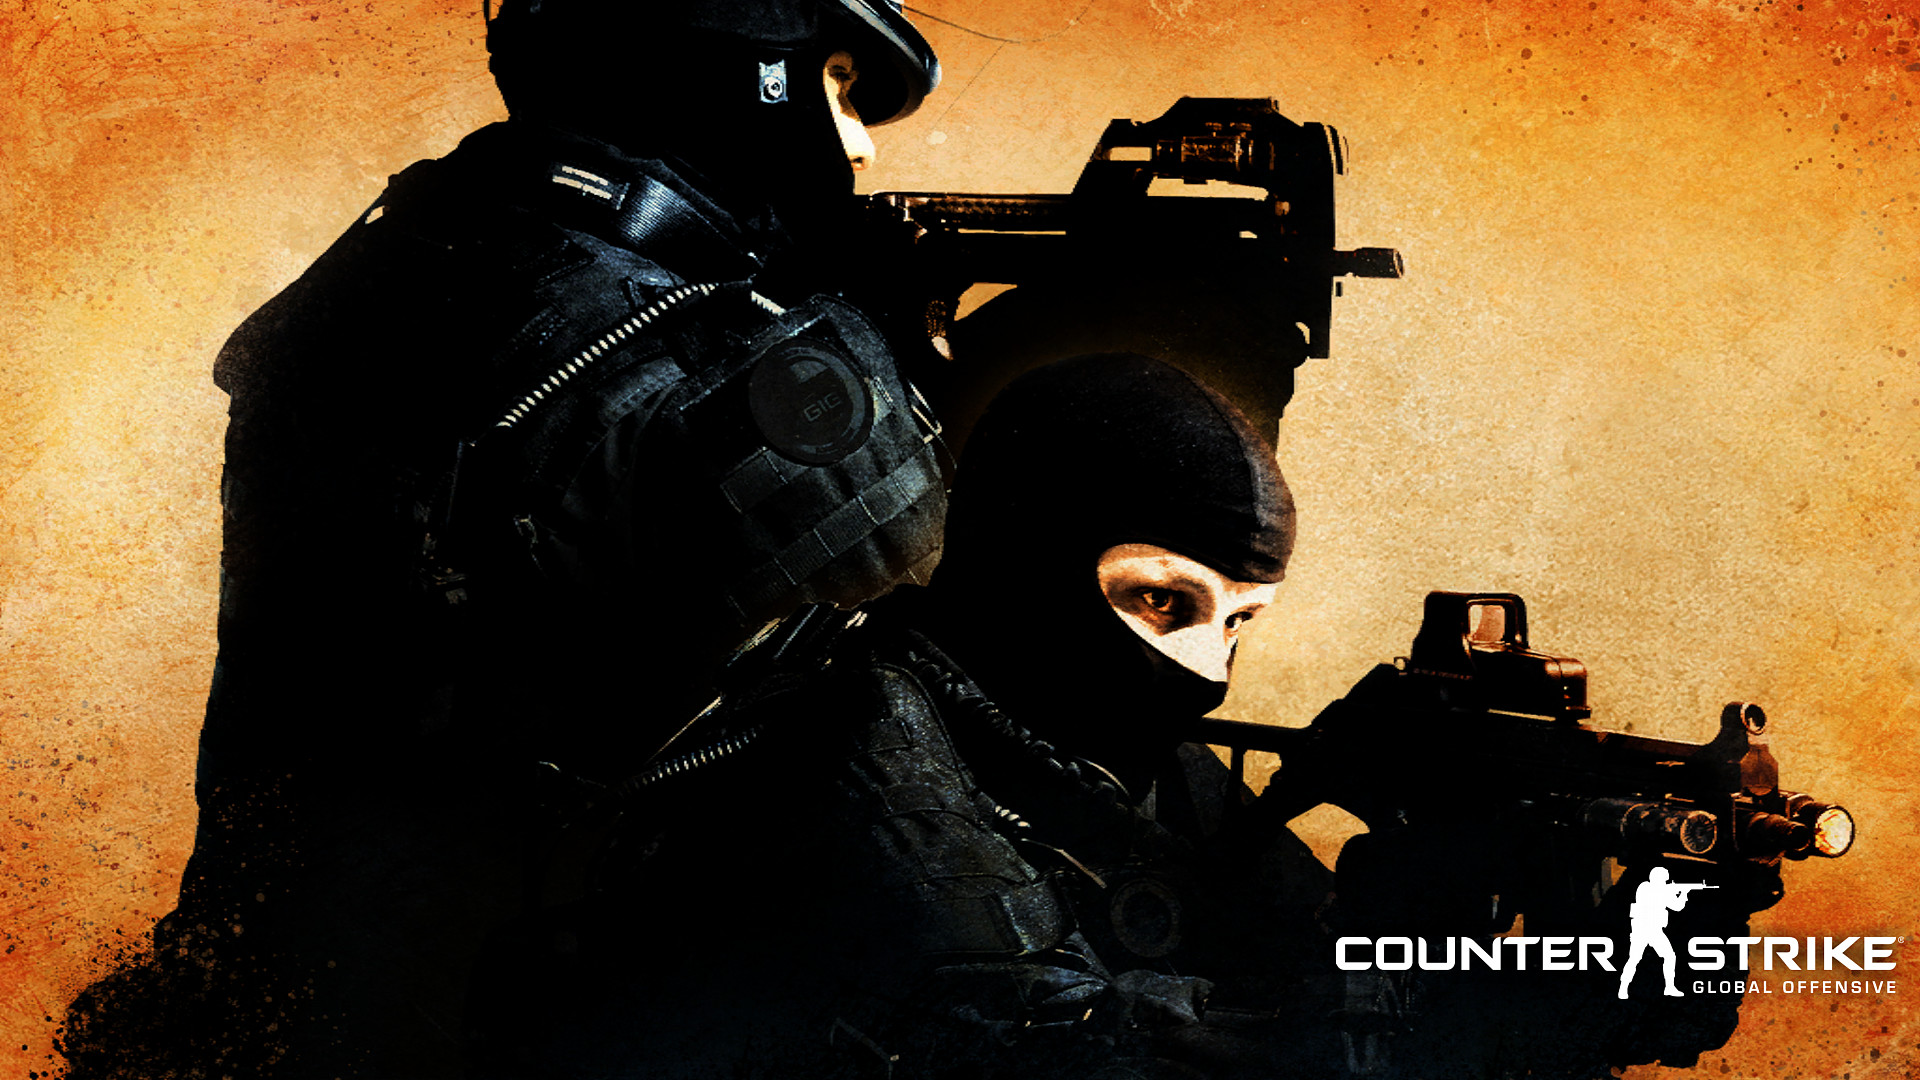 1920x1080 Counter Strike Global Offensive iPhone Wallpaper. Counter Strike Global  Offensive